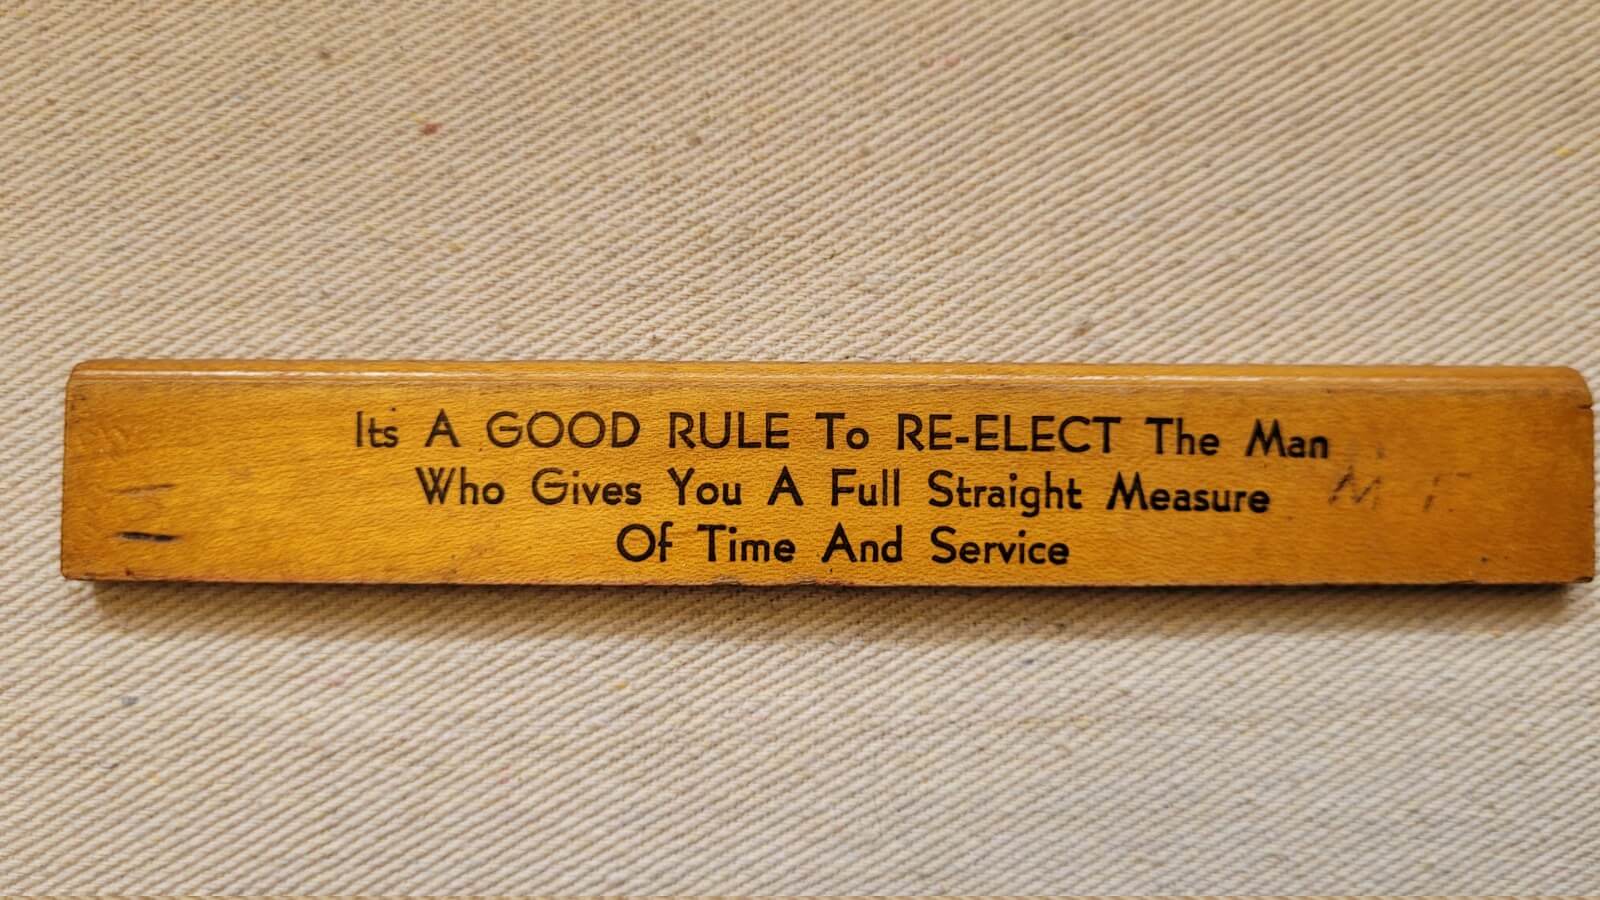 Acme Ruler and Advertising Company Rule, Toronto ON - Vintage Canadian Political Memorabilia